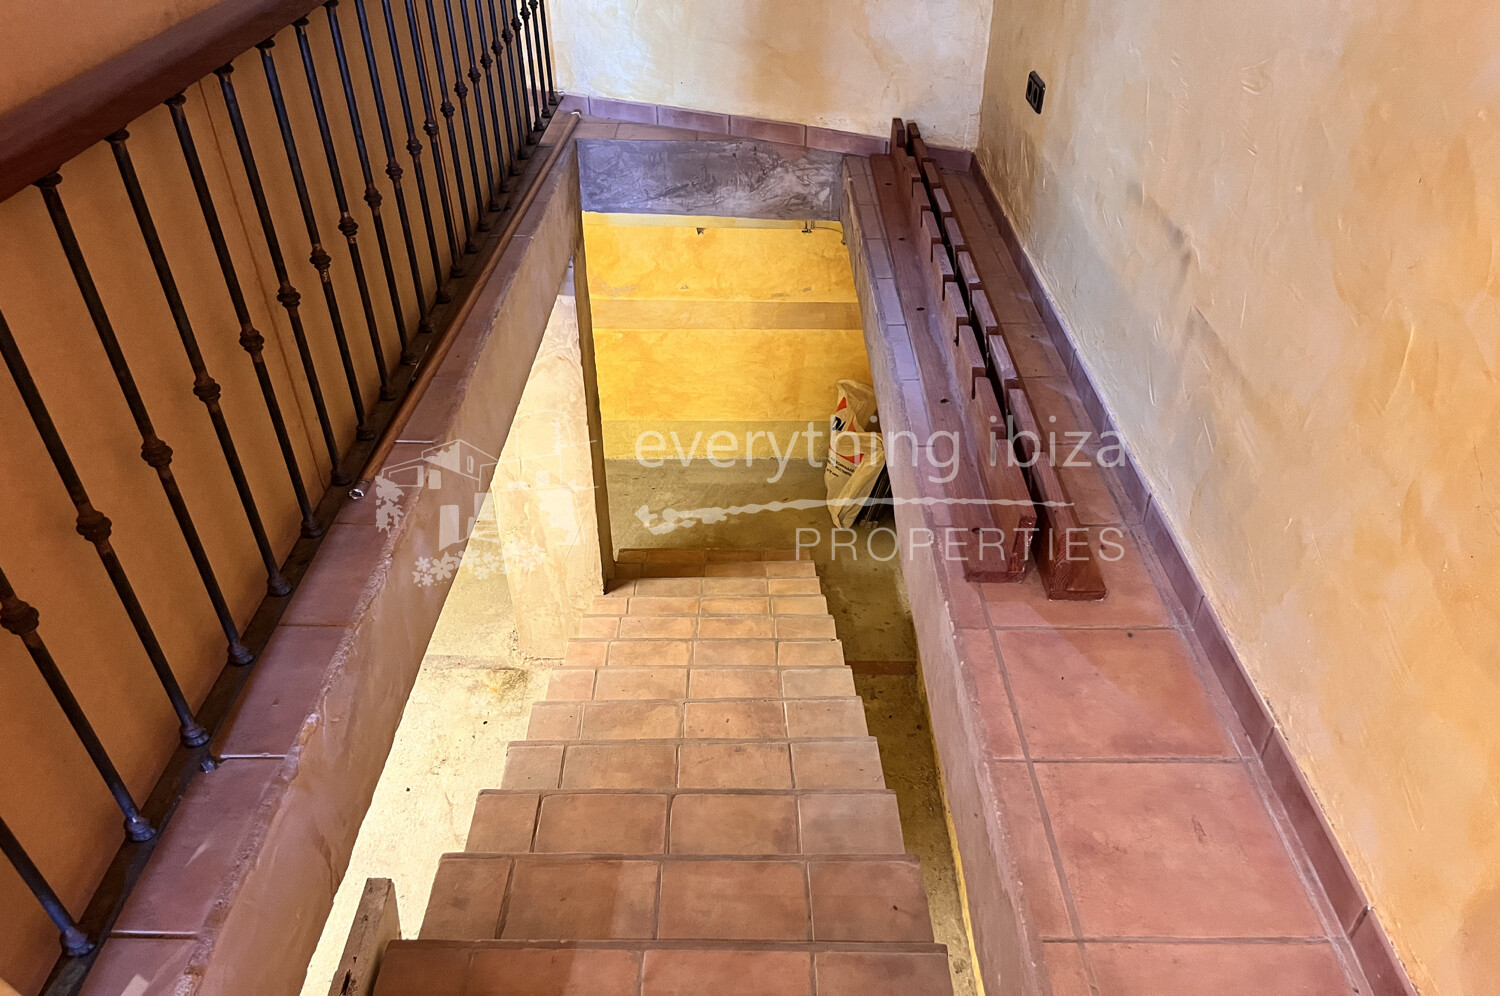 https://www.everythingibiza.com/properties/versatile-commer…of-san-jose-1640/,ref. 14, for sale in Ibiza by everything ibiza Properties